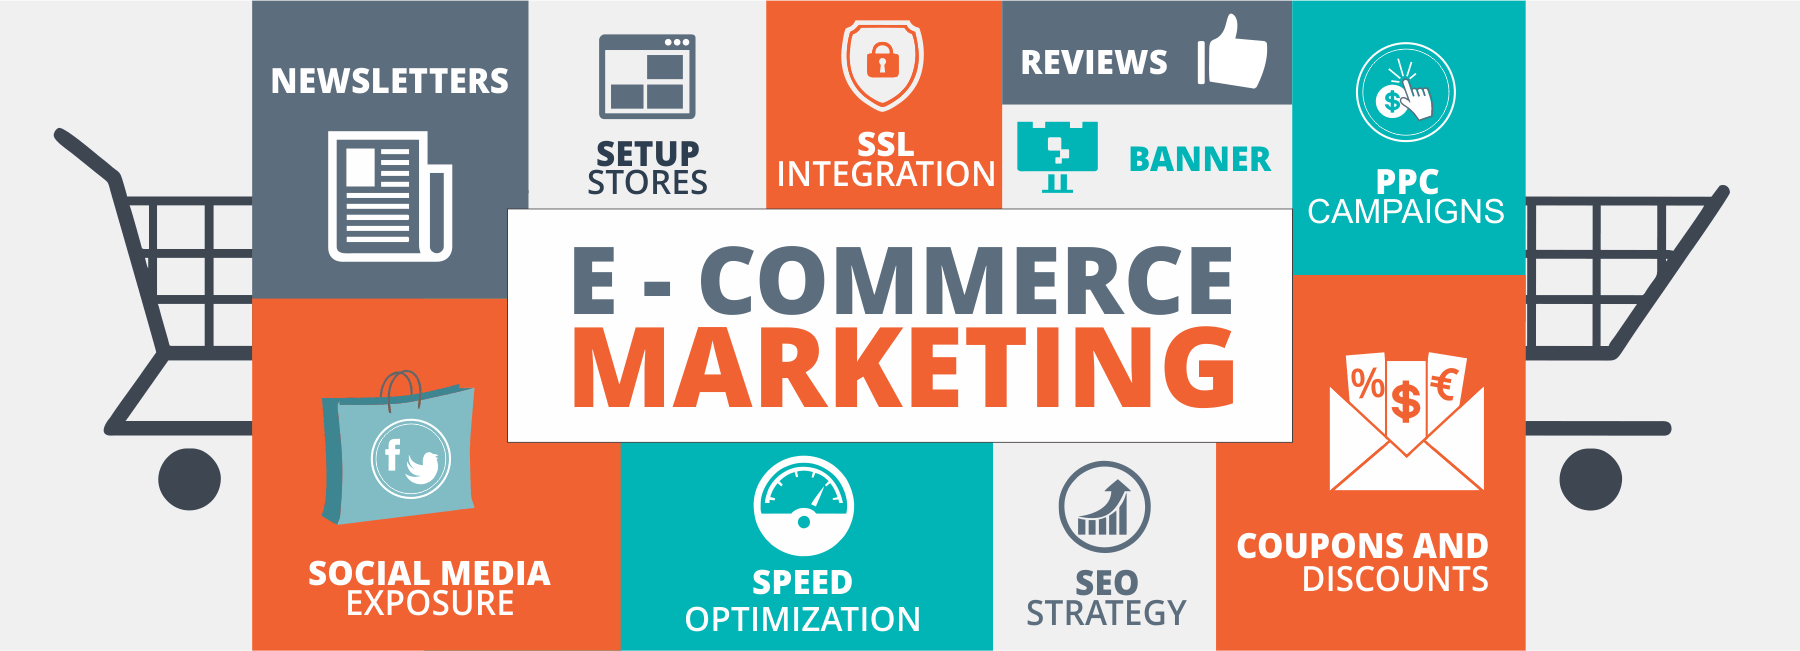 E-Commerce SEO Tips to grow eCommerce Store performance in 2016!